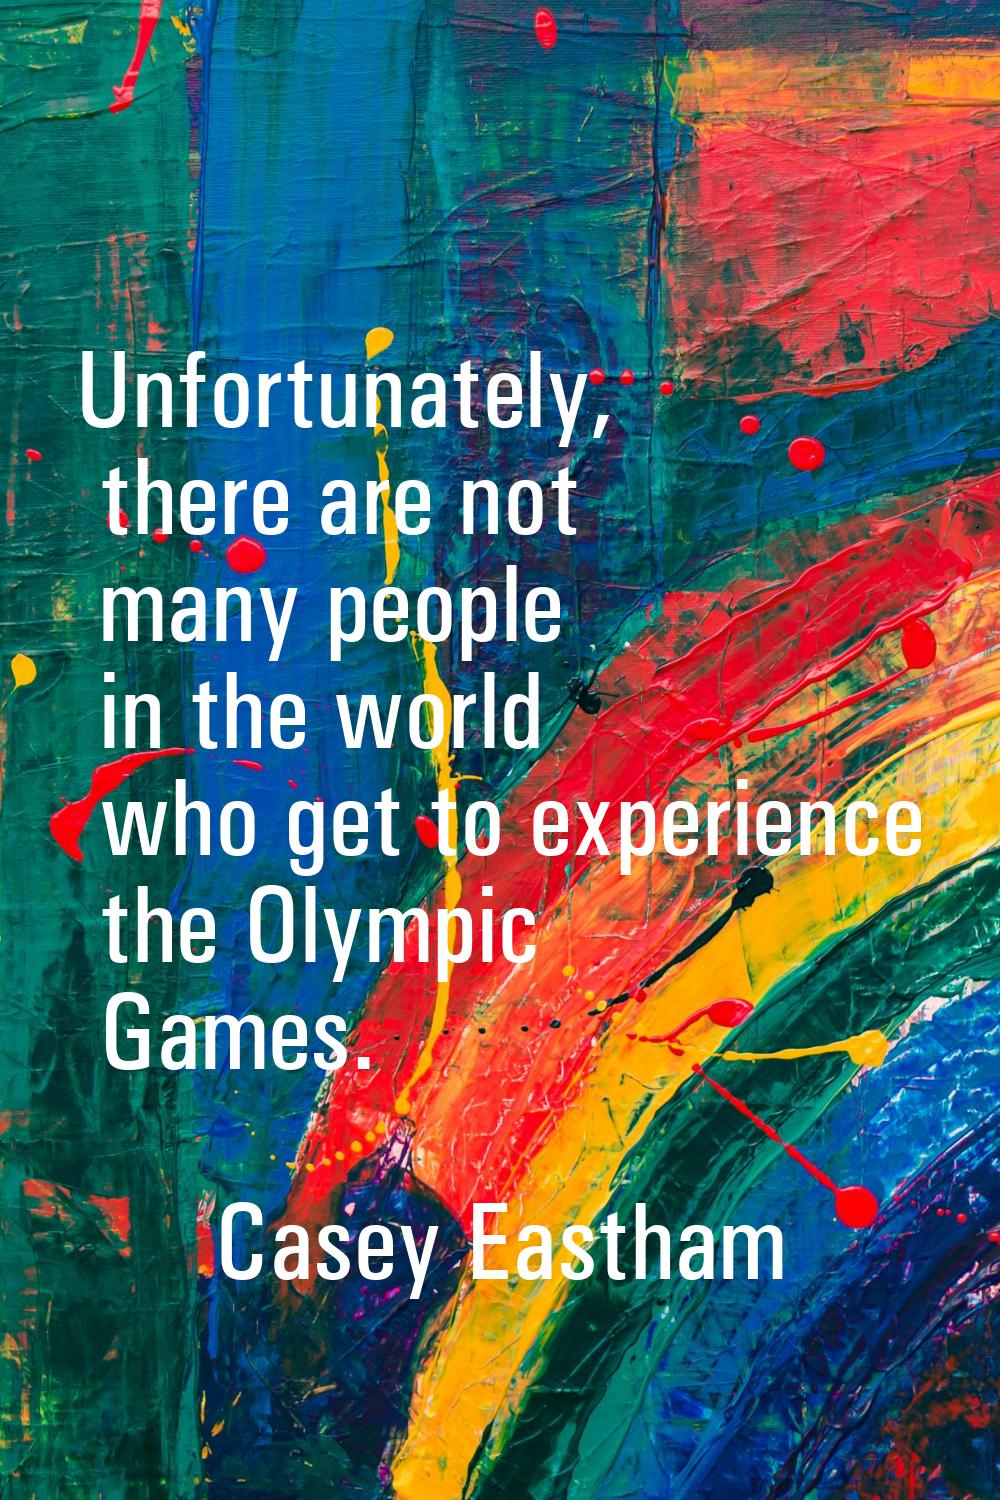 Unfortunately, there are not many people in the world who get to experience the Olympic Games.